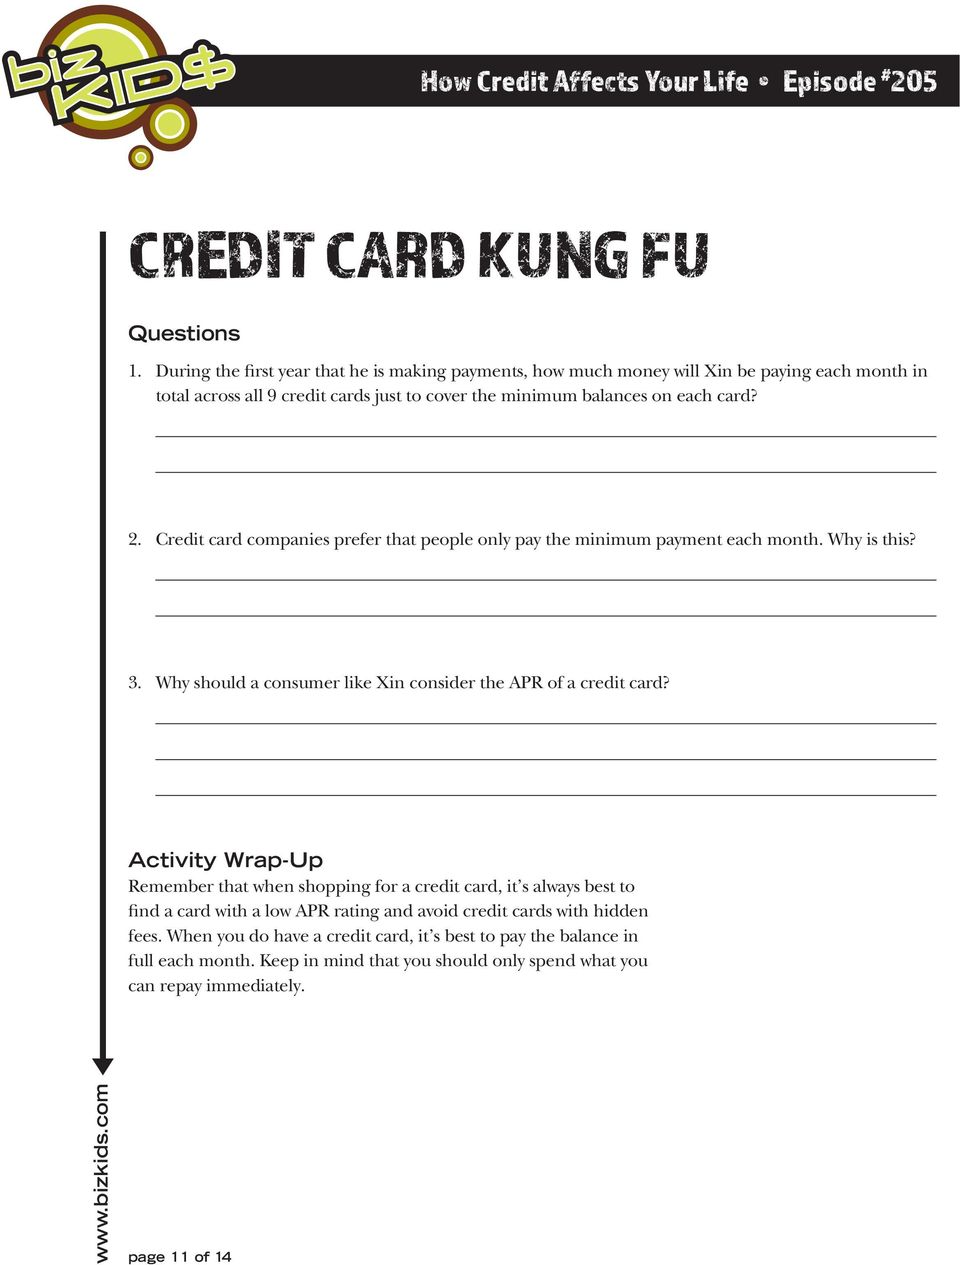 card? 2. Credit card companies prefer that people only pay the minimum payment each month. Why is this? 3. Why should a consumer like Xin consider the APR of a credit card?